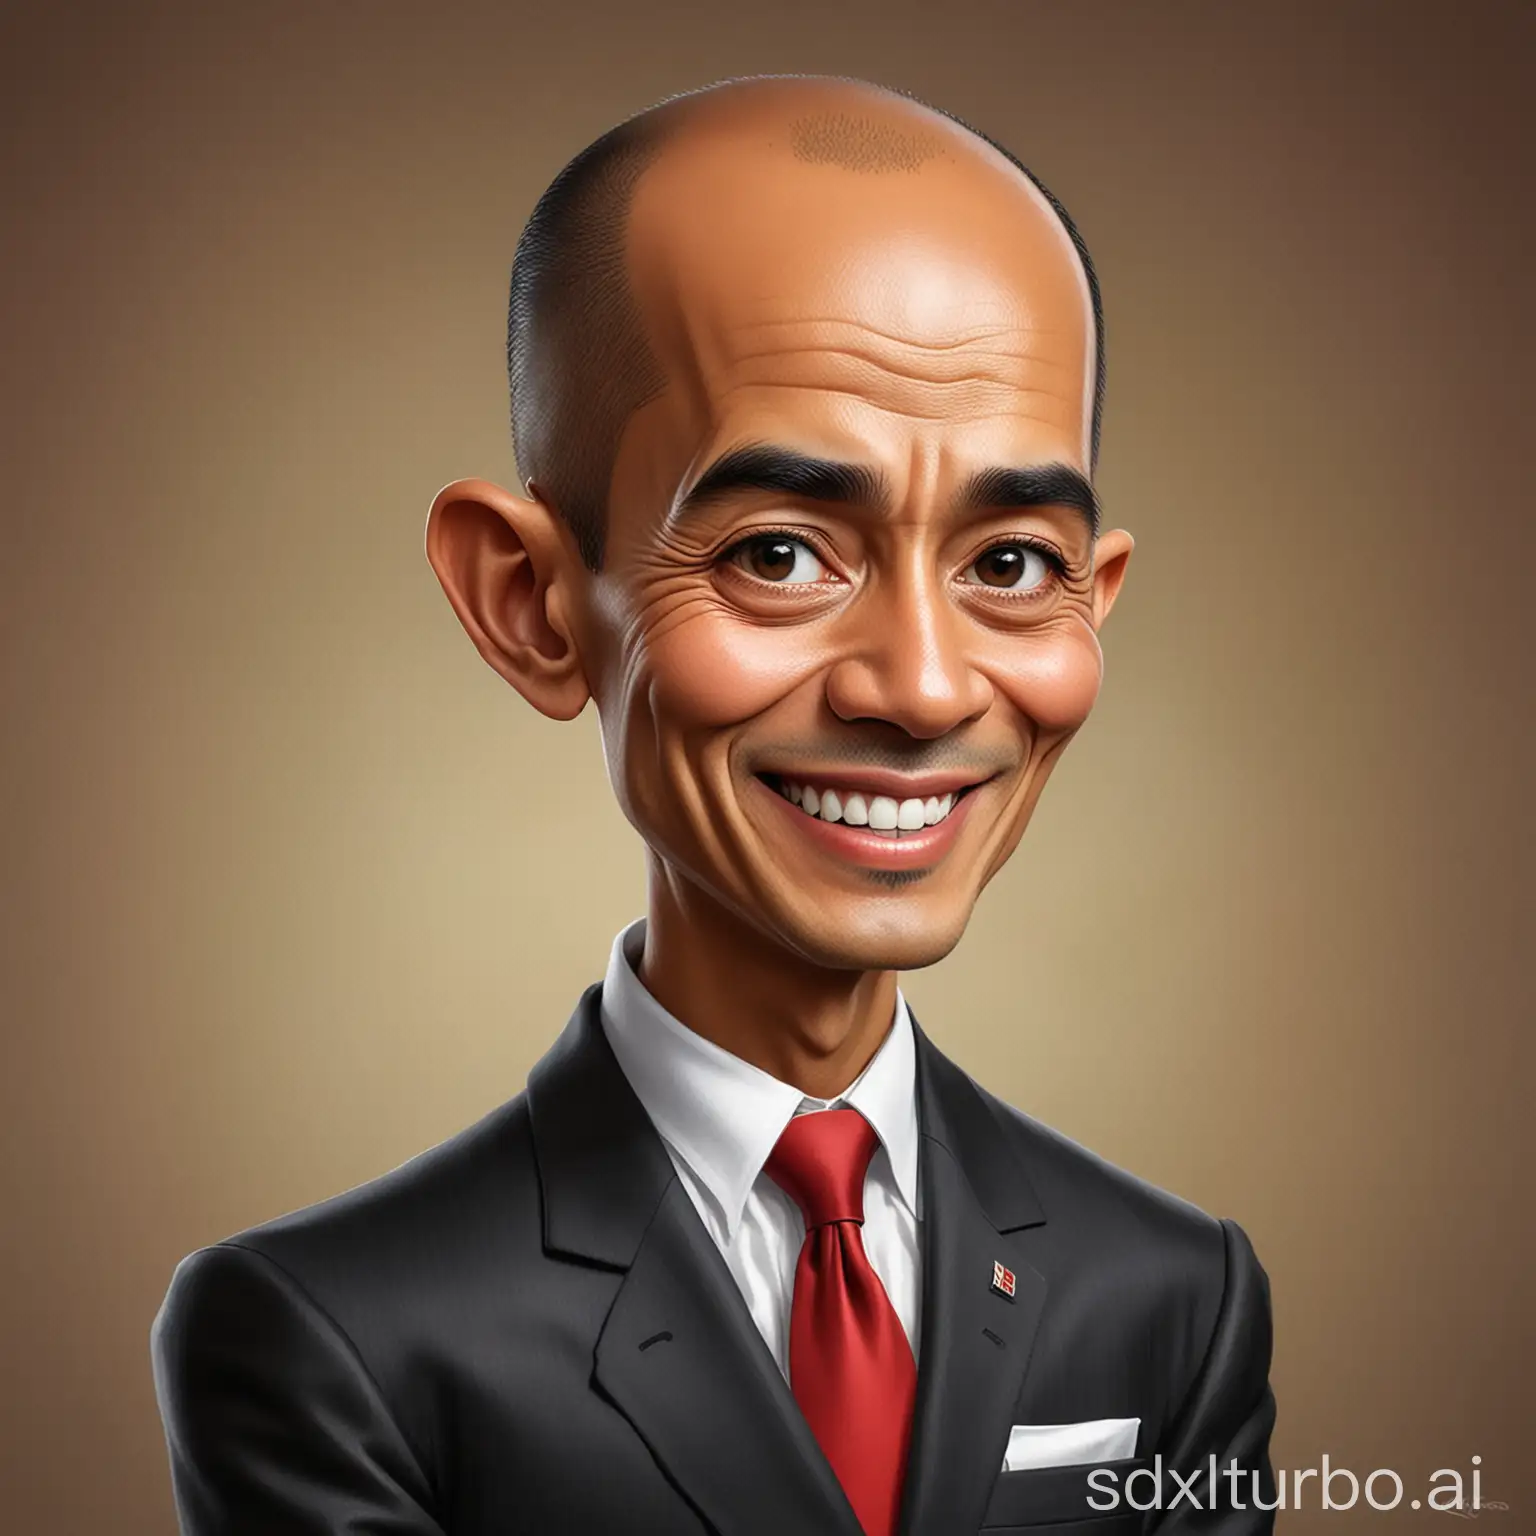 Caricature-of-Jokowidodo-in-Informal-Attire-with-Shaved-Head